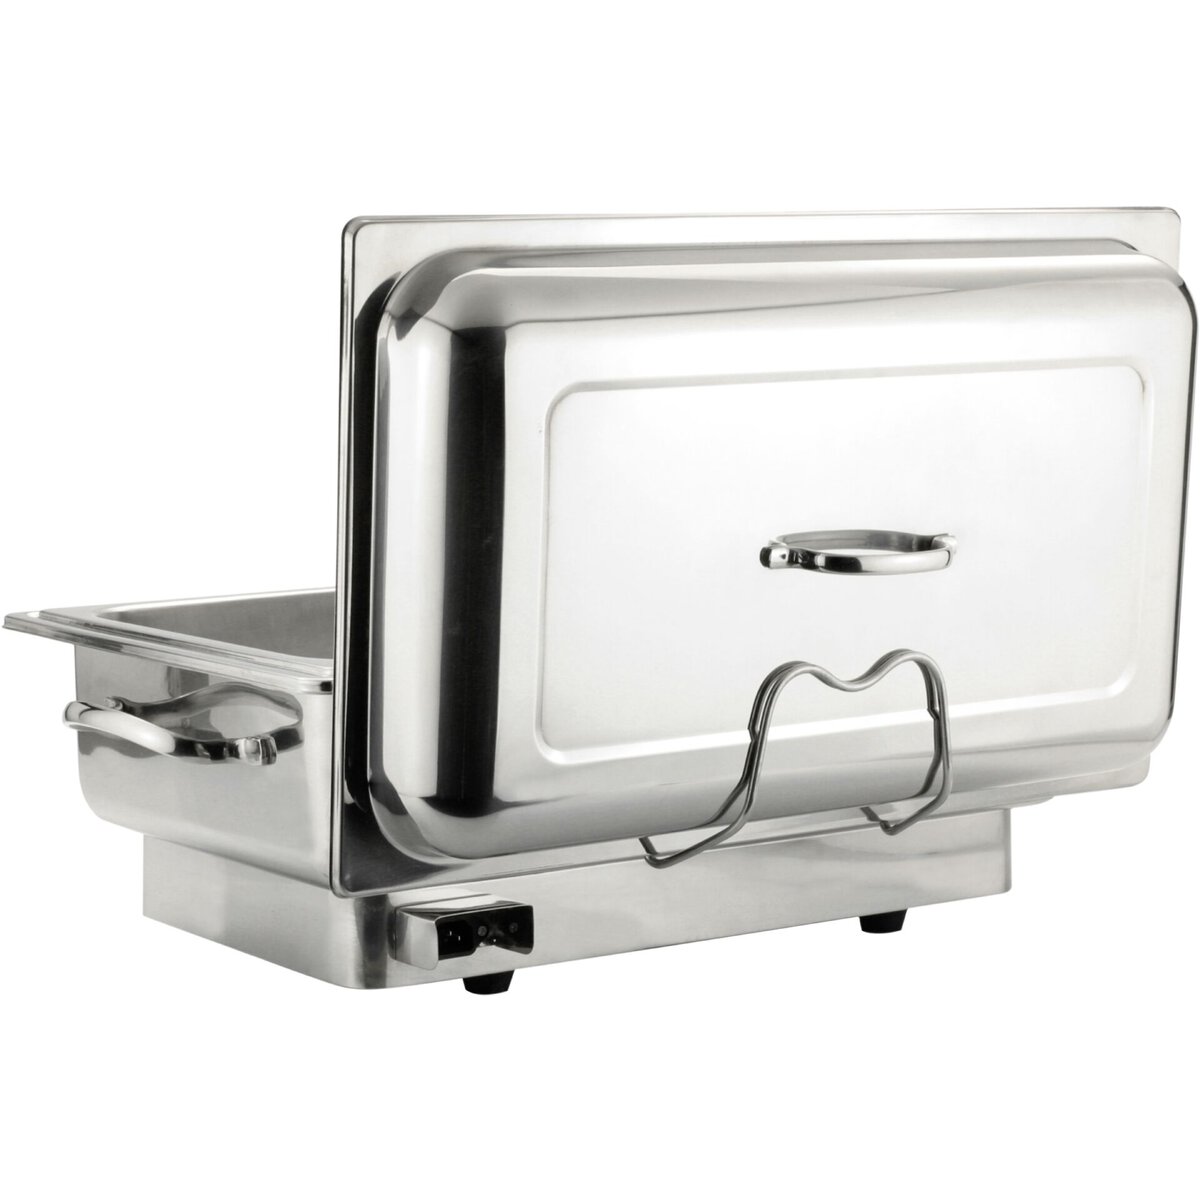 Chafing Dish 1/1 GN (1)